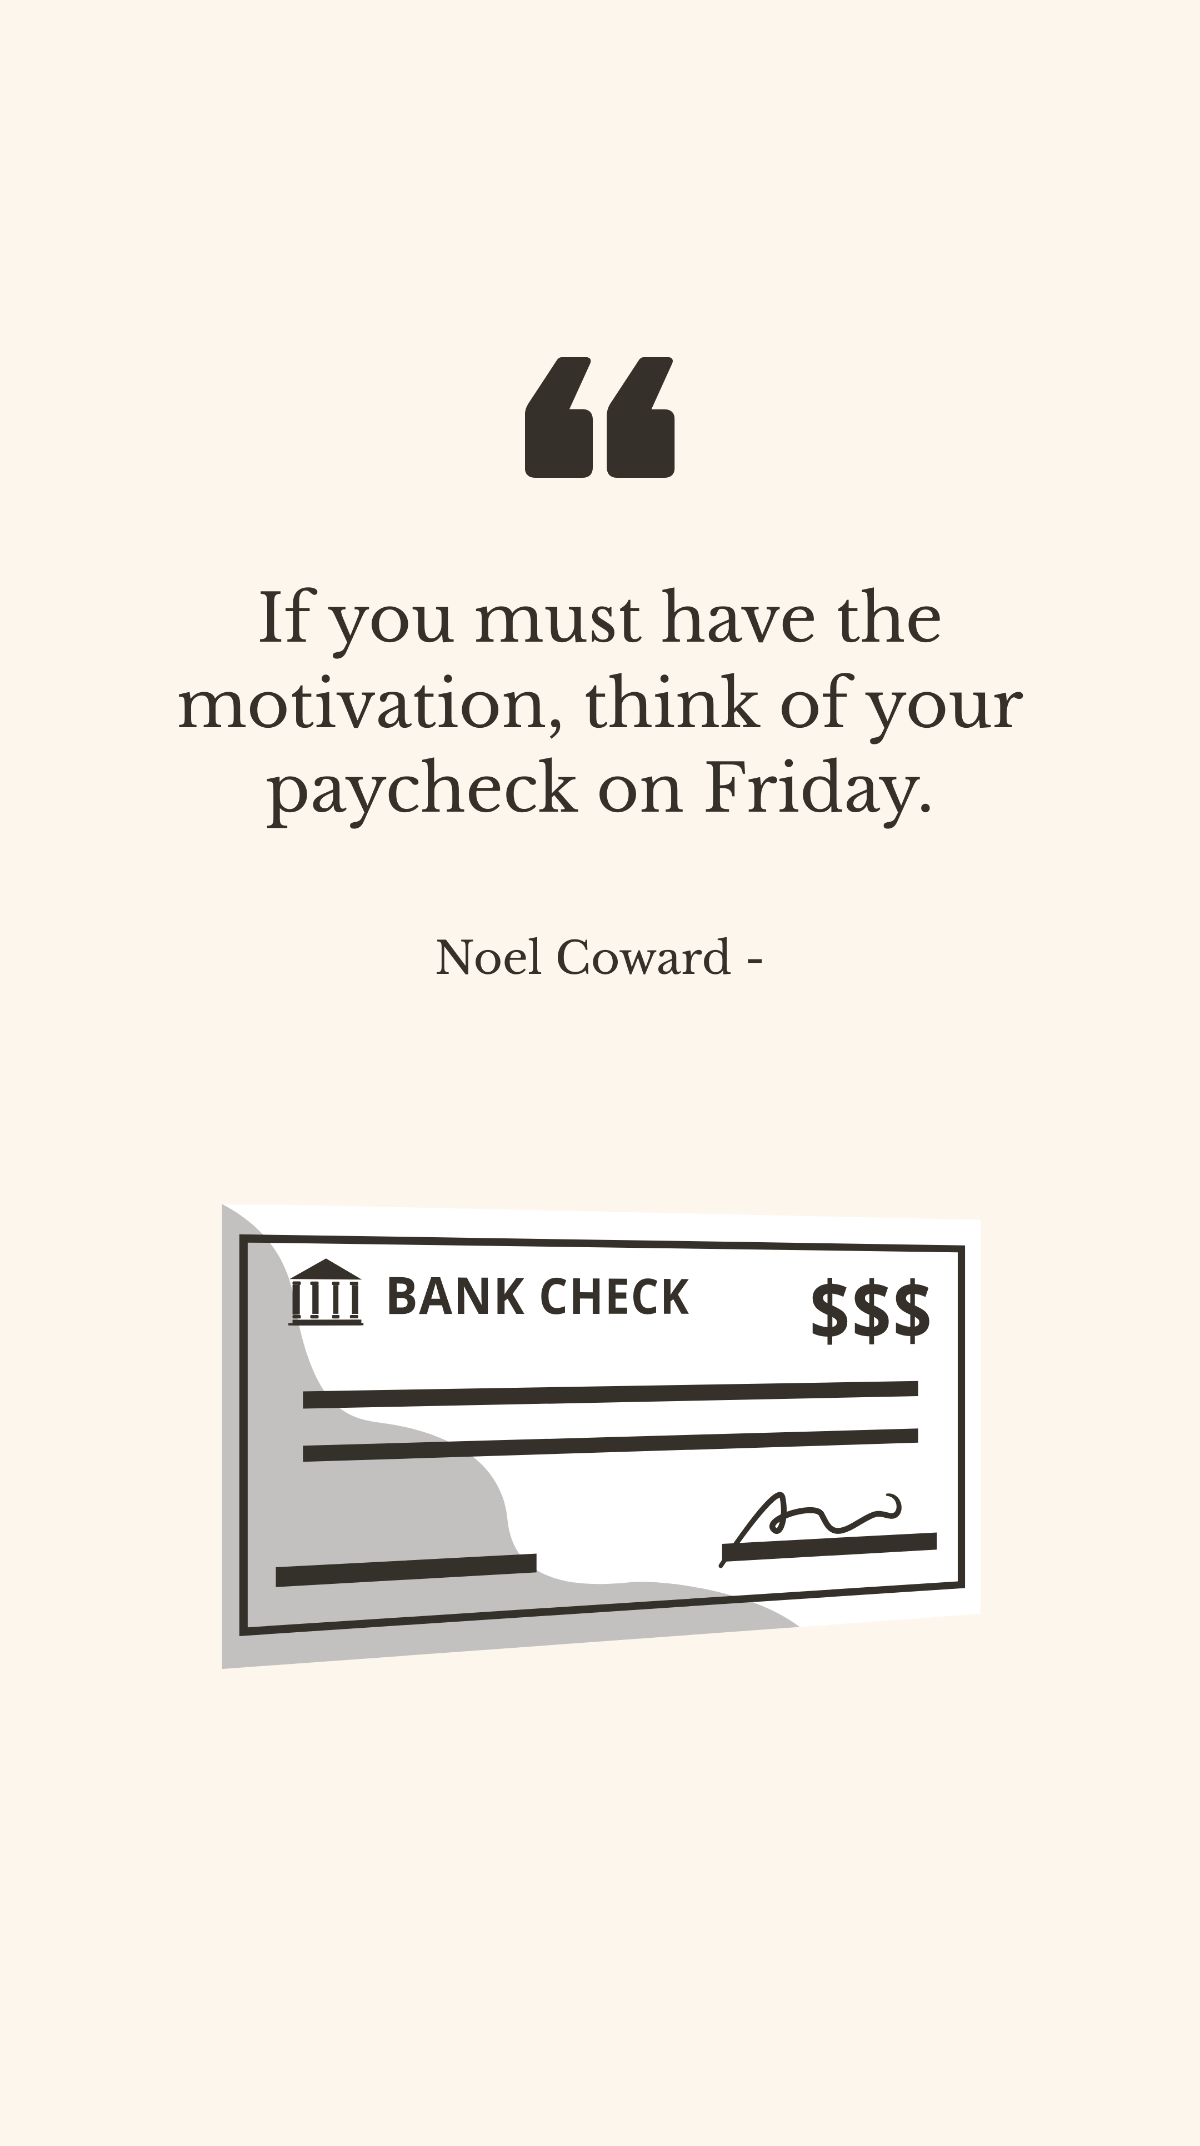 Noel Coward - If you must have the motivation, think of your paycheck on Friday.